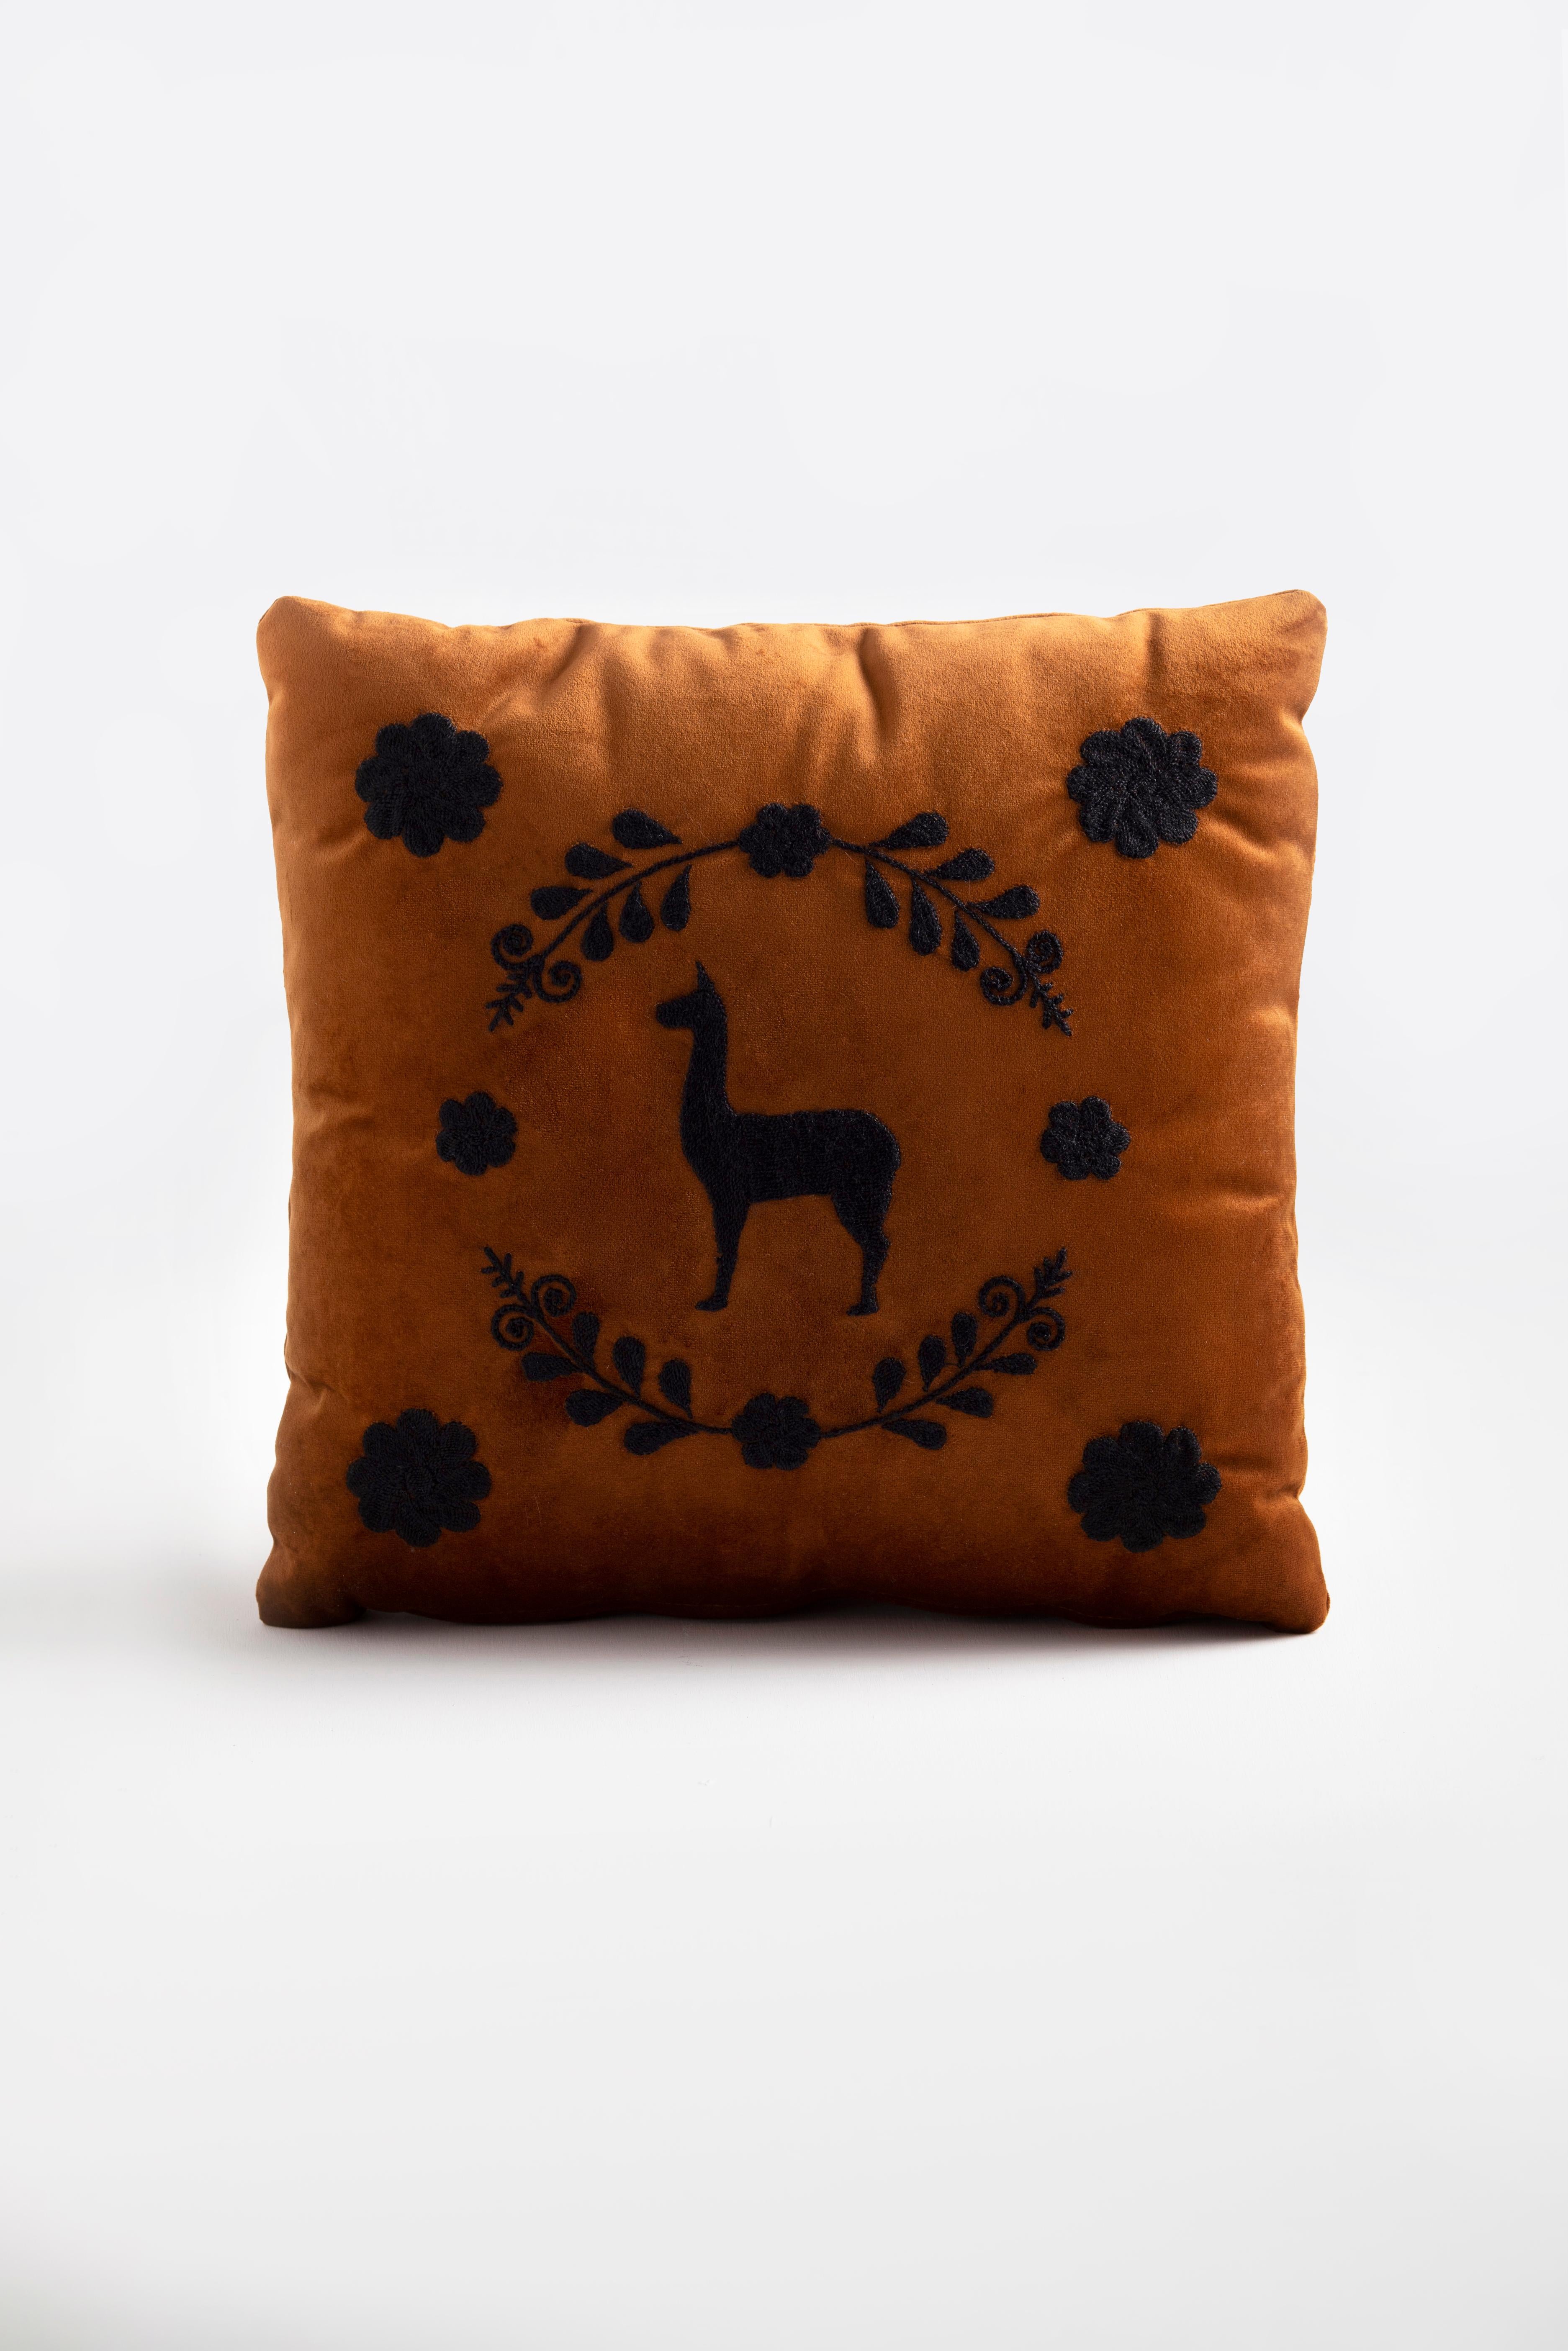 Modern LLAMA Hand Embroidered Decorative Pillows Terracota Velvet by ANDEAN, Set of 2 For Sale